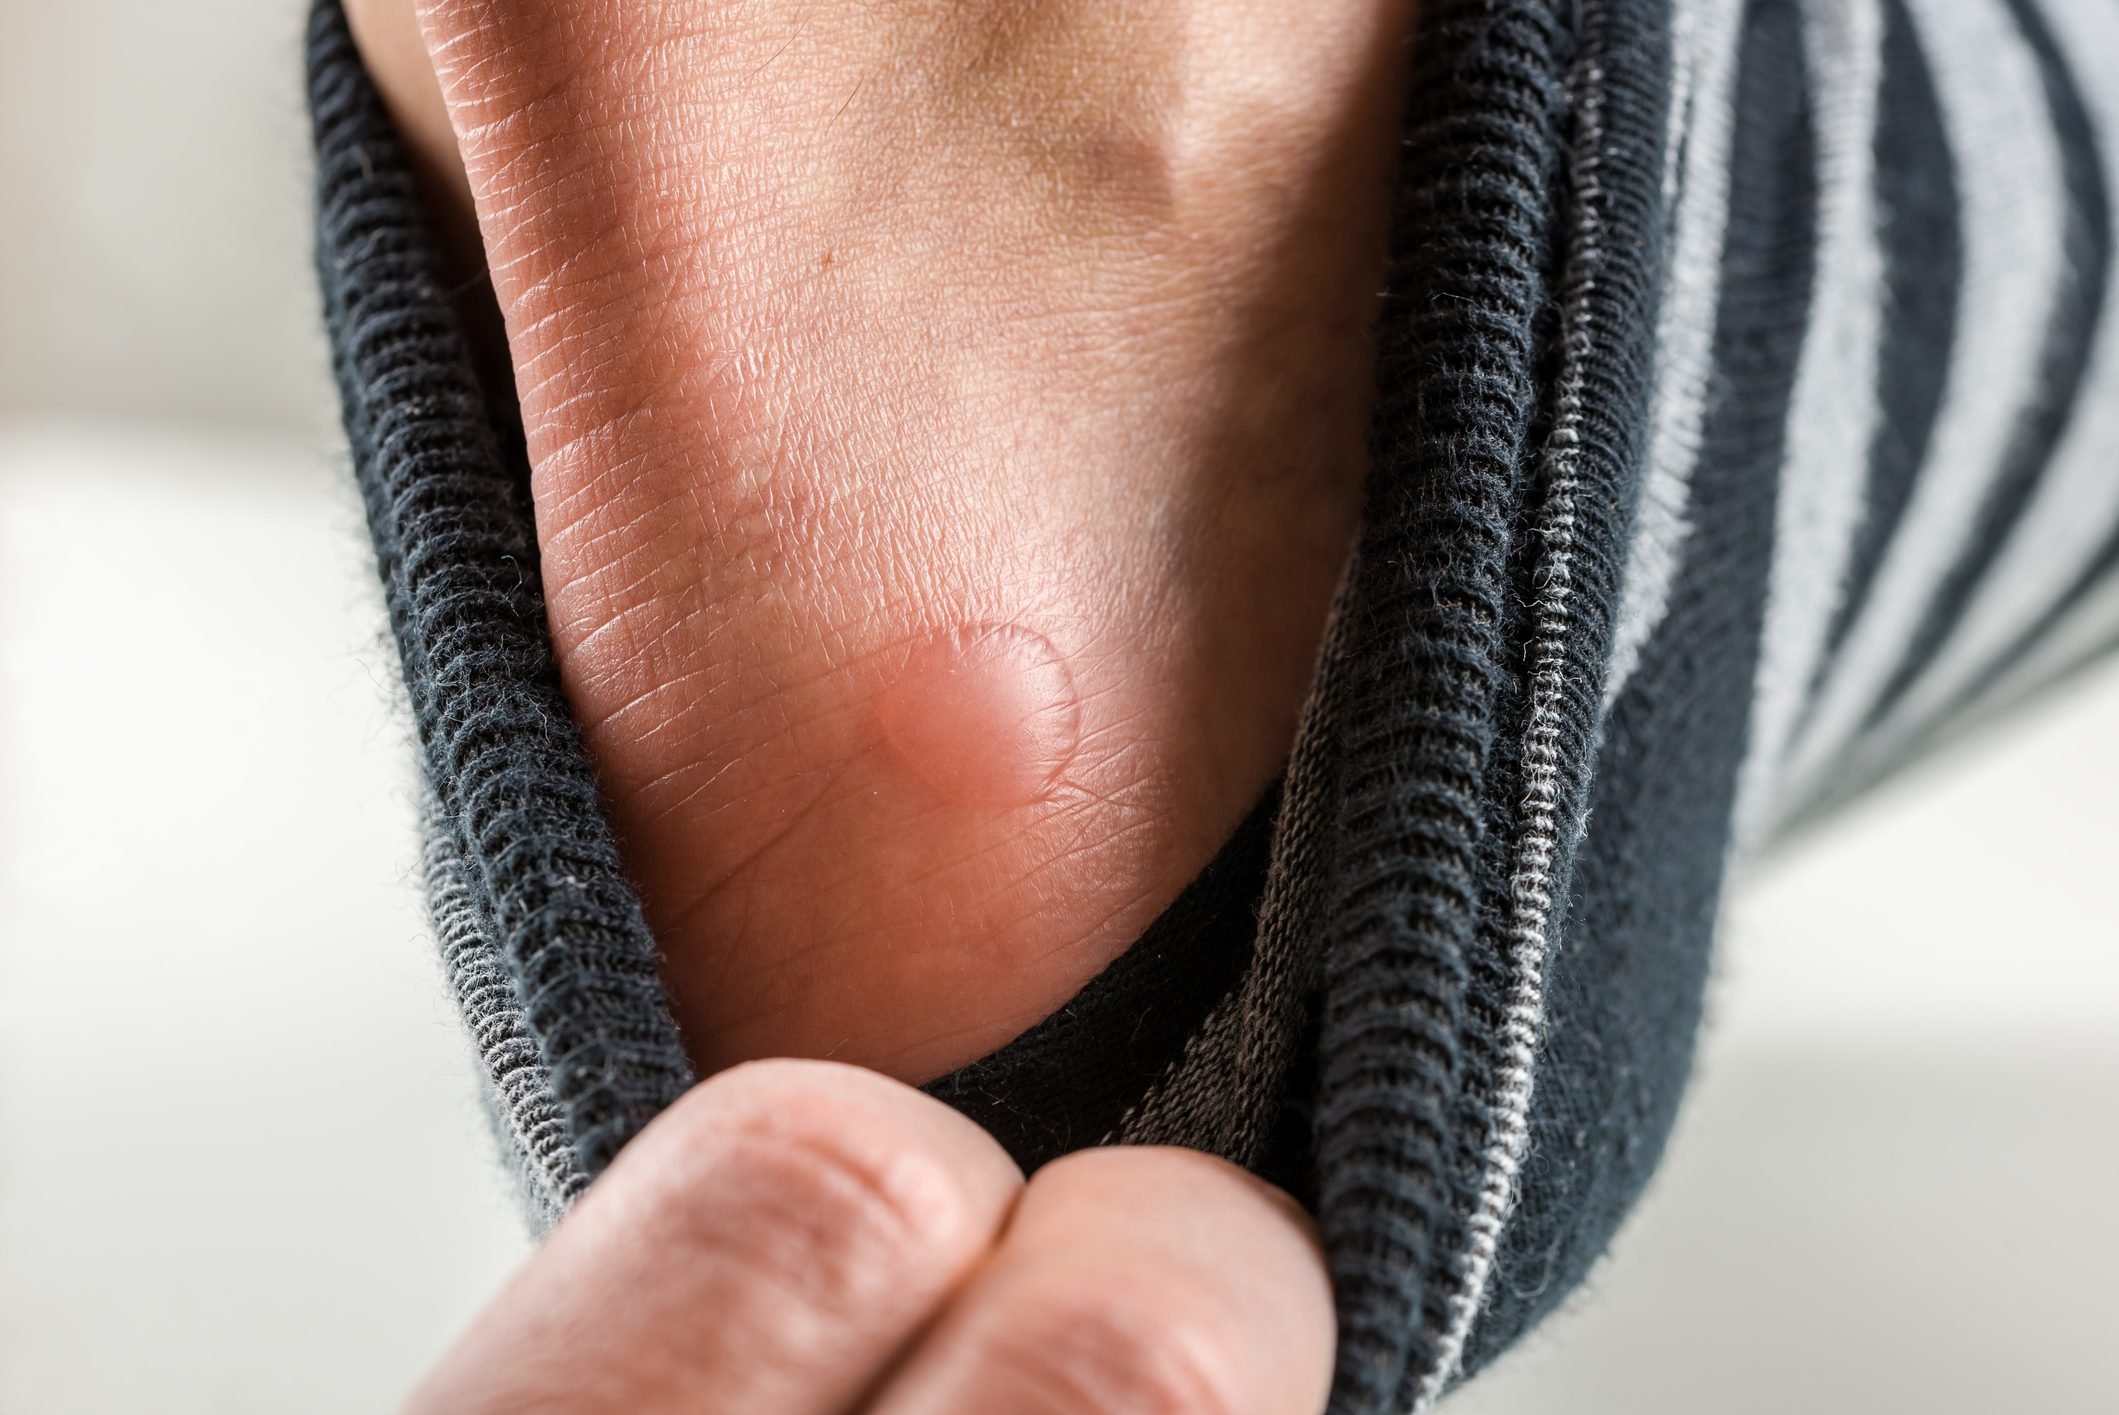 Have a Friction Blister? Here's How to Prevent and Treat Blisters